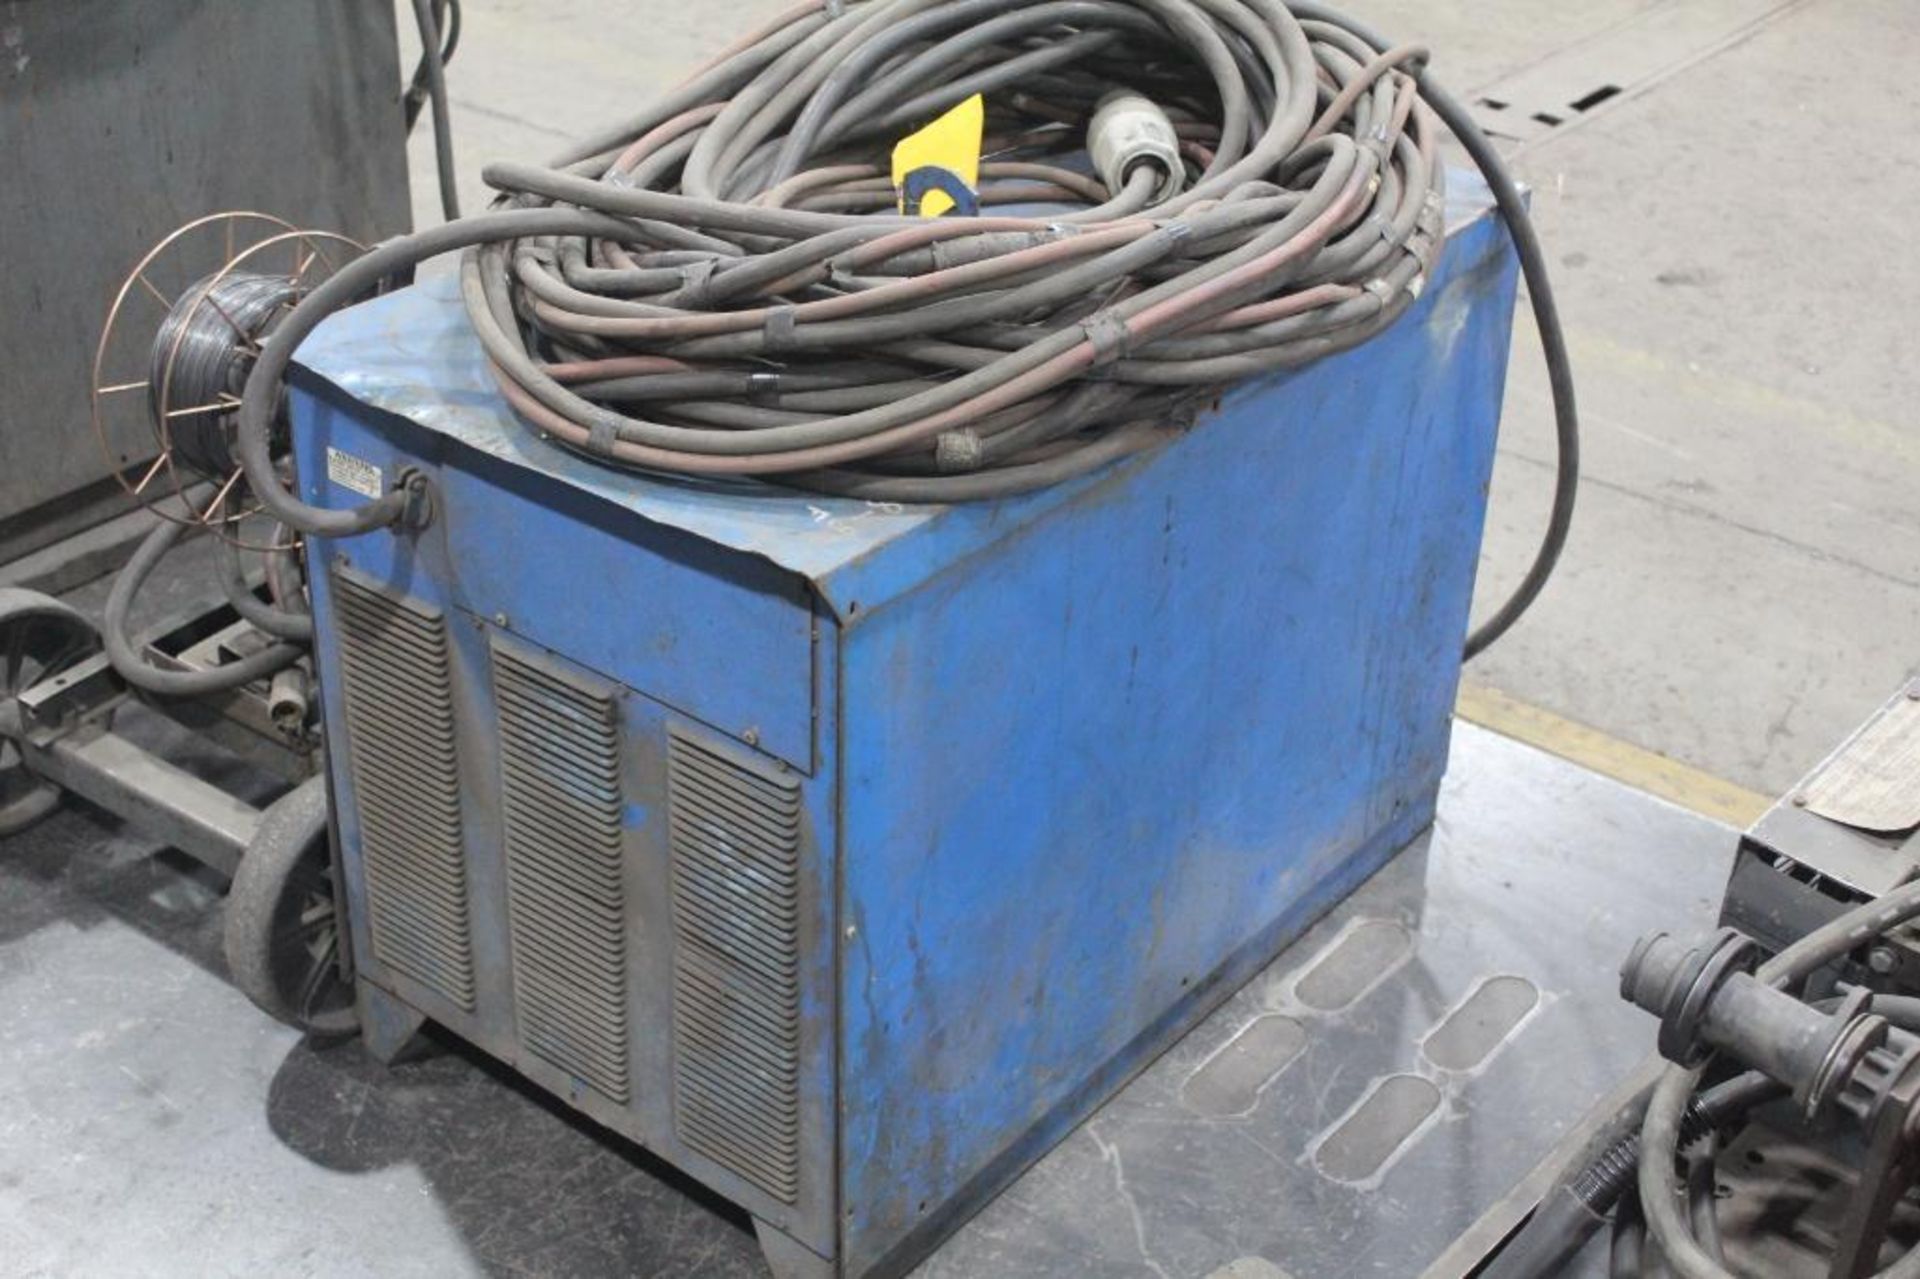 LINCOLN ELECTRIC IDEALARC DC-600 WELDER SN.AC658235 230-460V WITH LN-8 WIRE FEED SN.57089 115V - Image 3 of 10